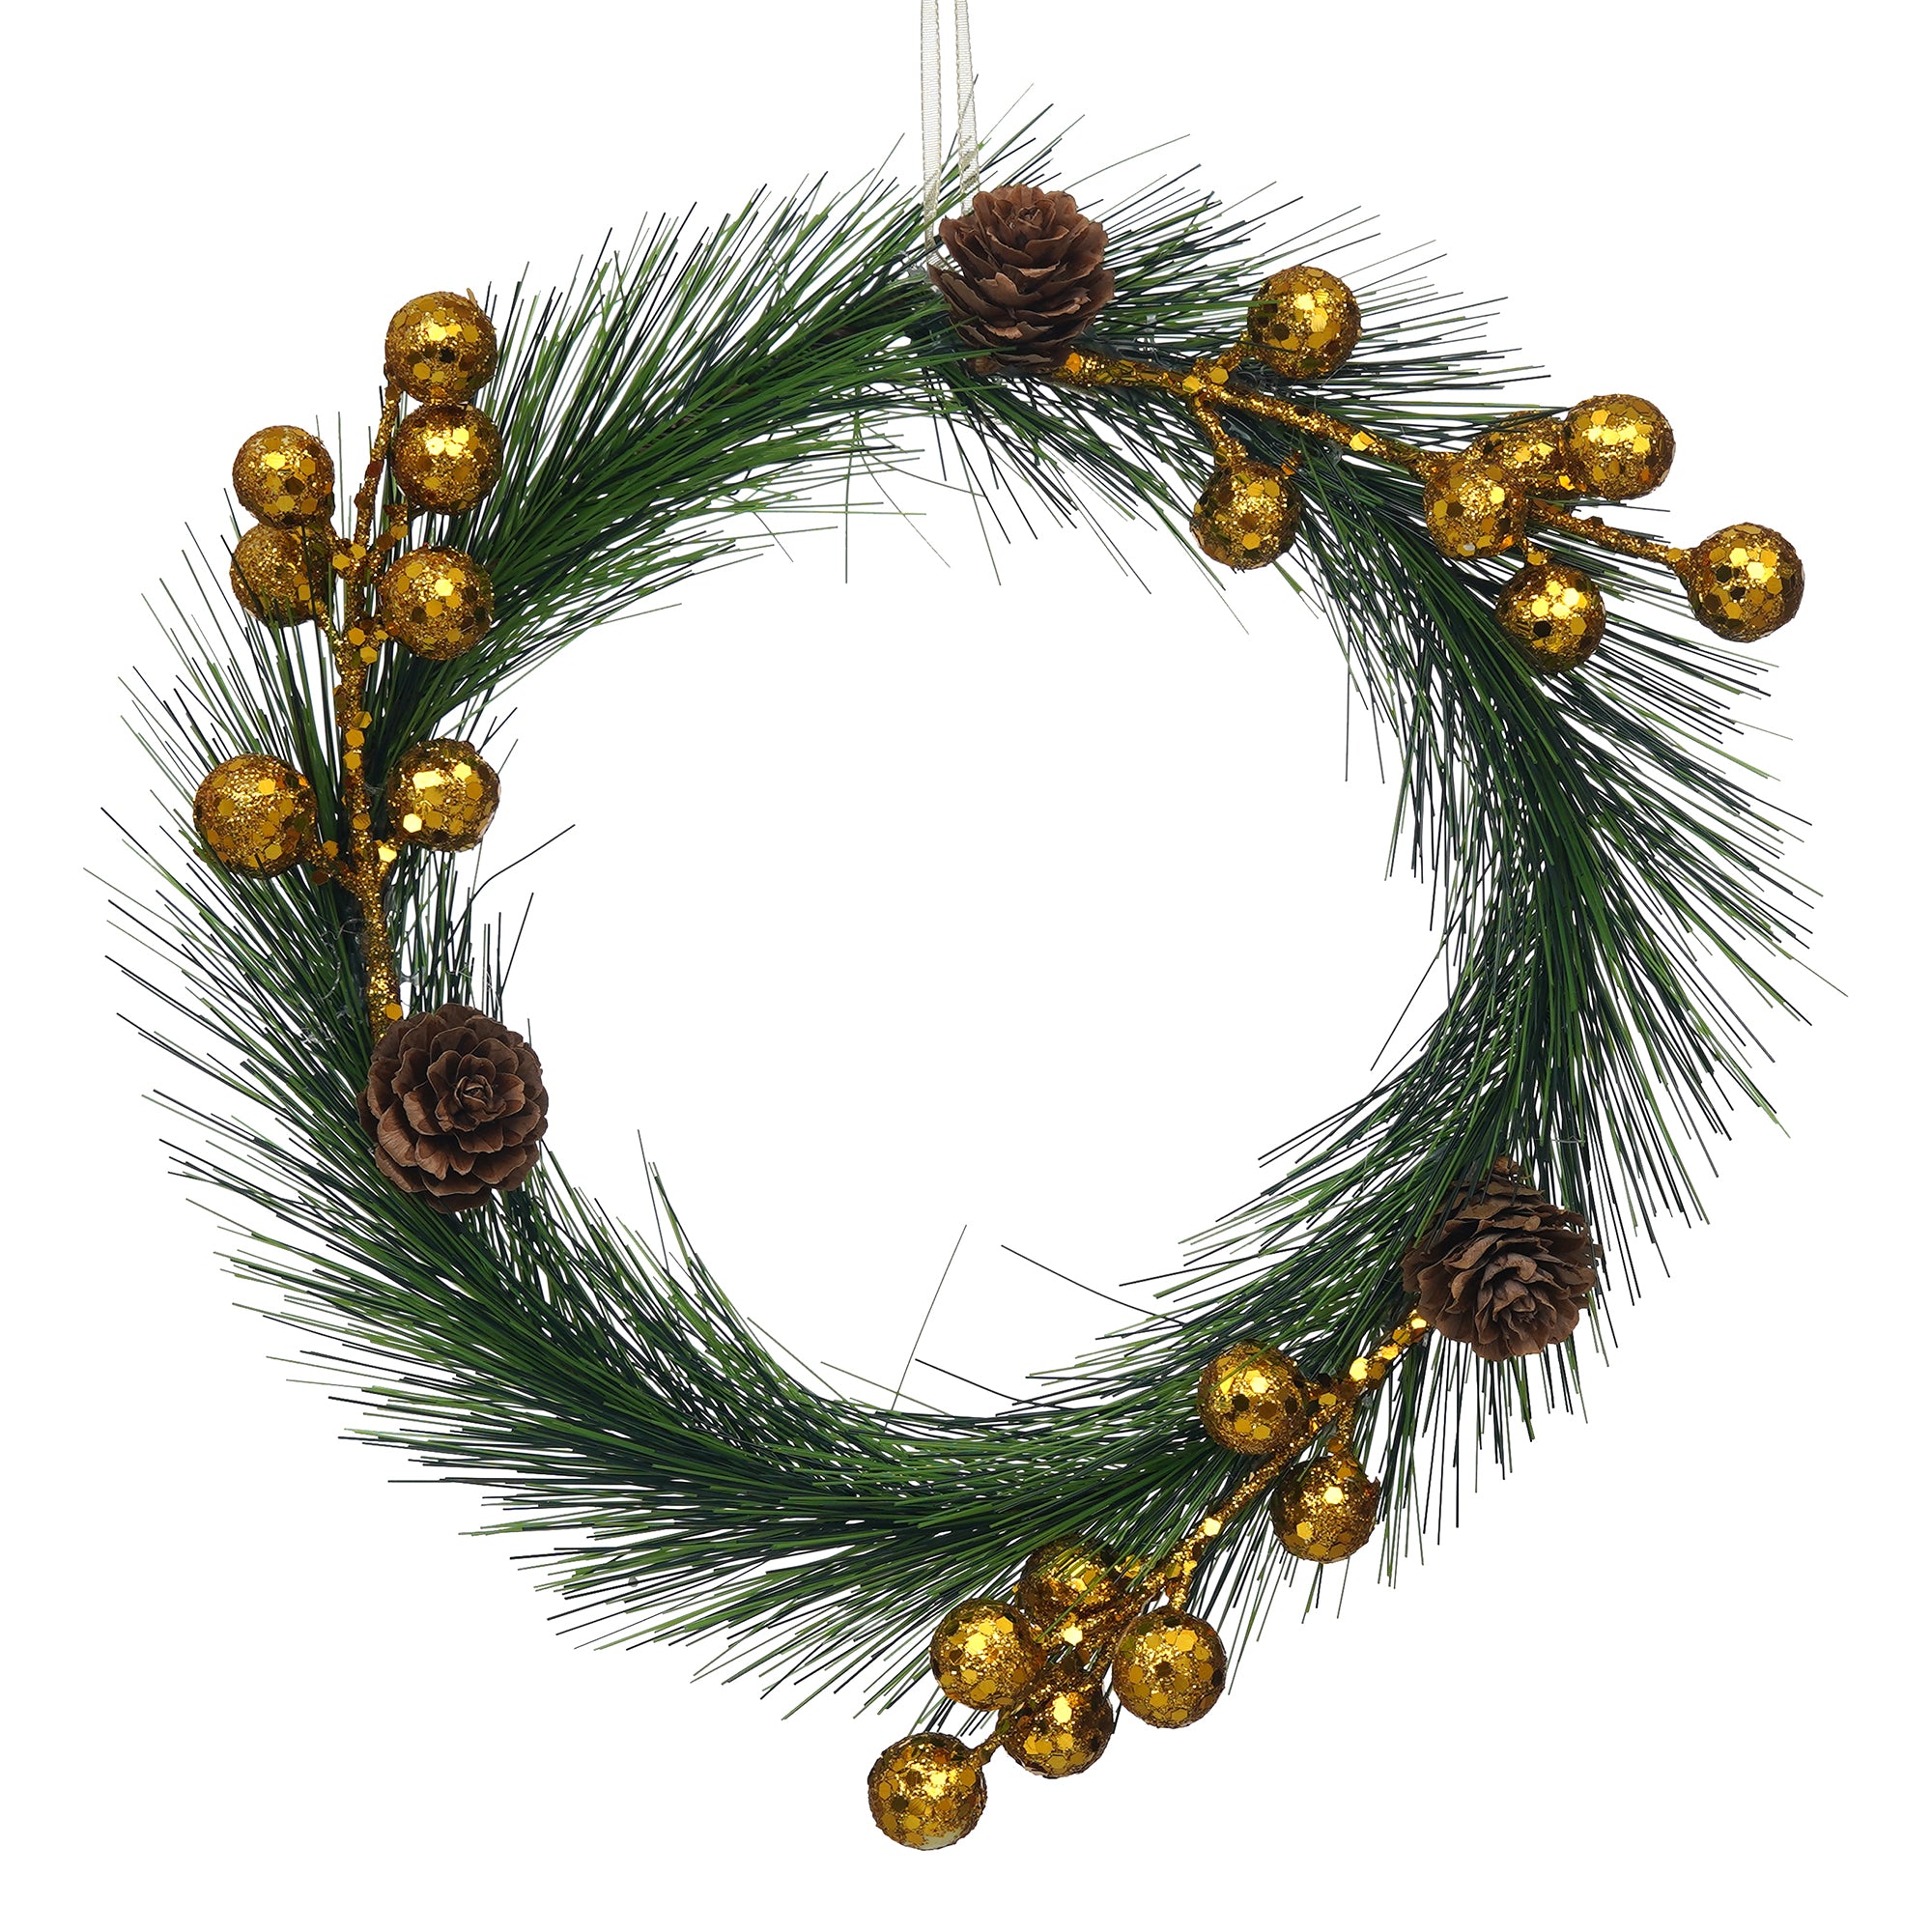 eCraftIndia Green Christmas Wreath with Gold Balls and Flowers Decorative Ornaments 2